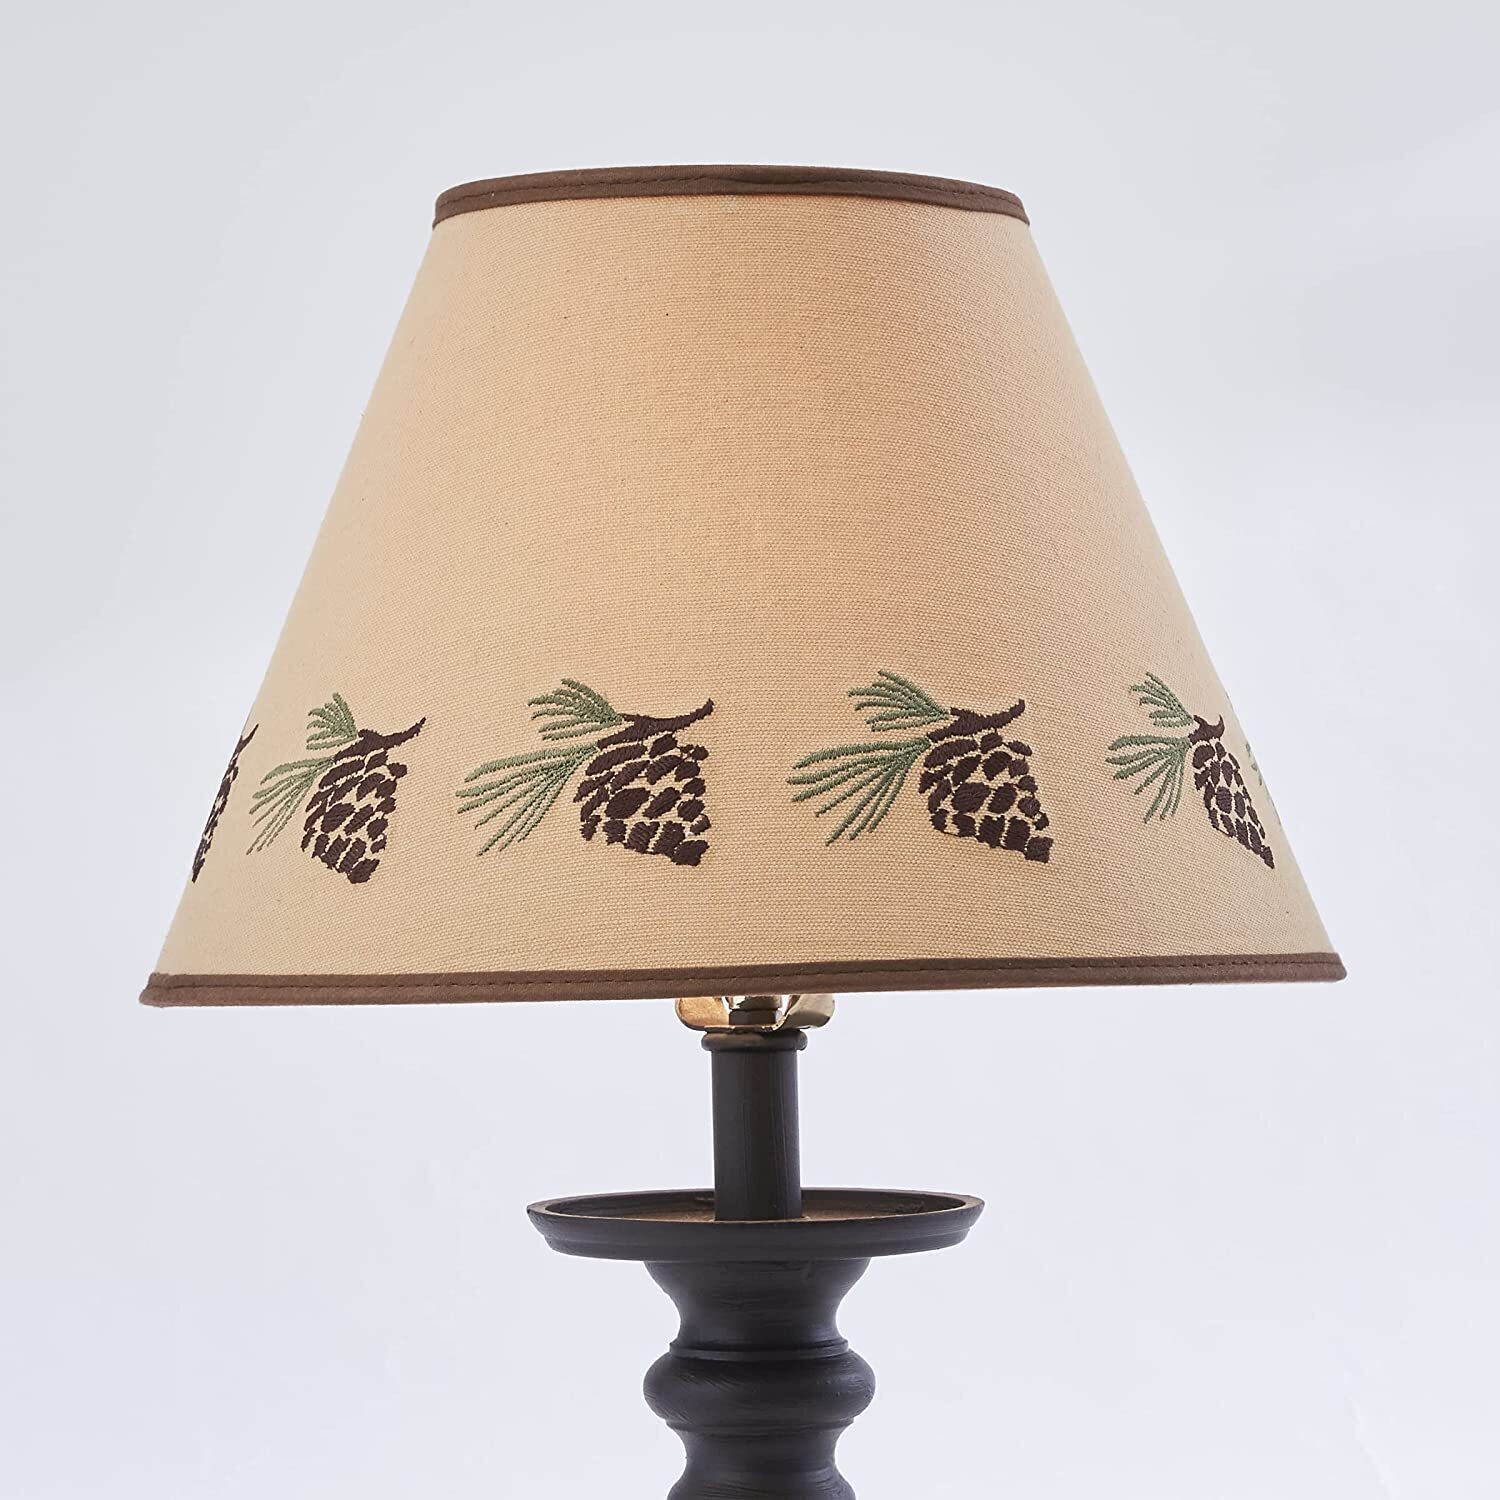 Embroidered Pine Cone Lamp Shade